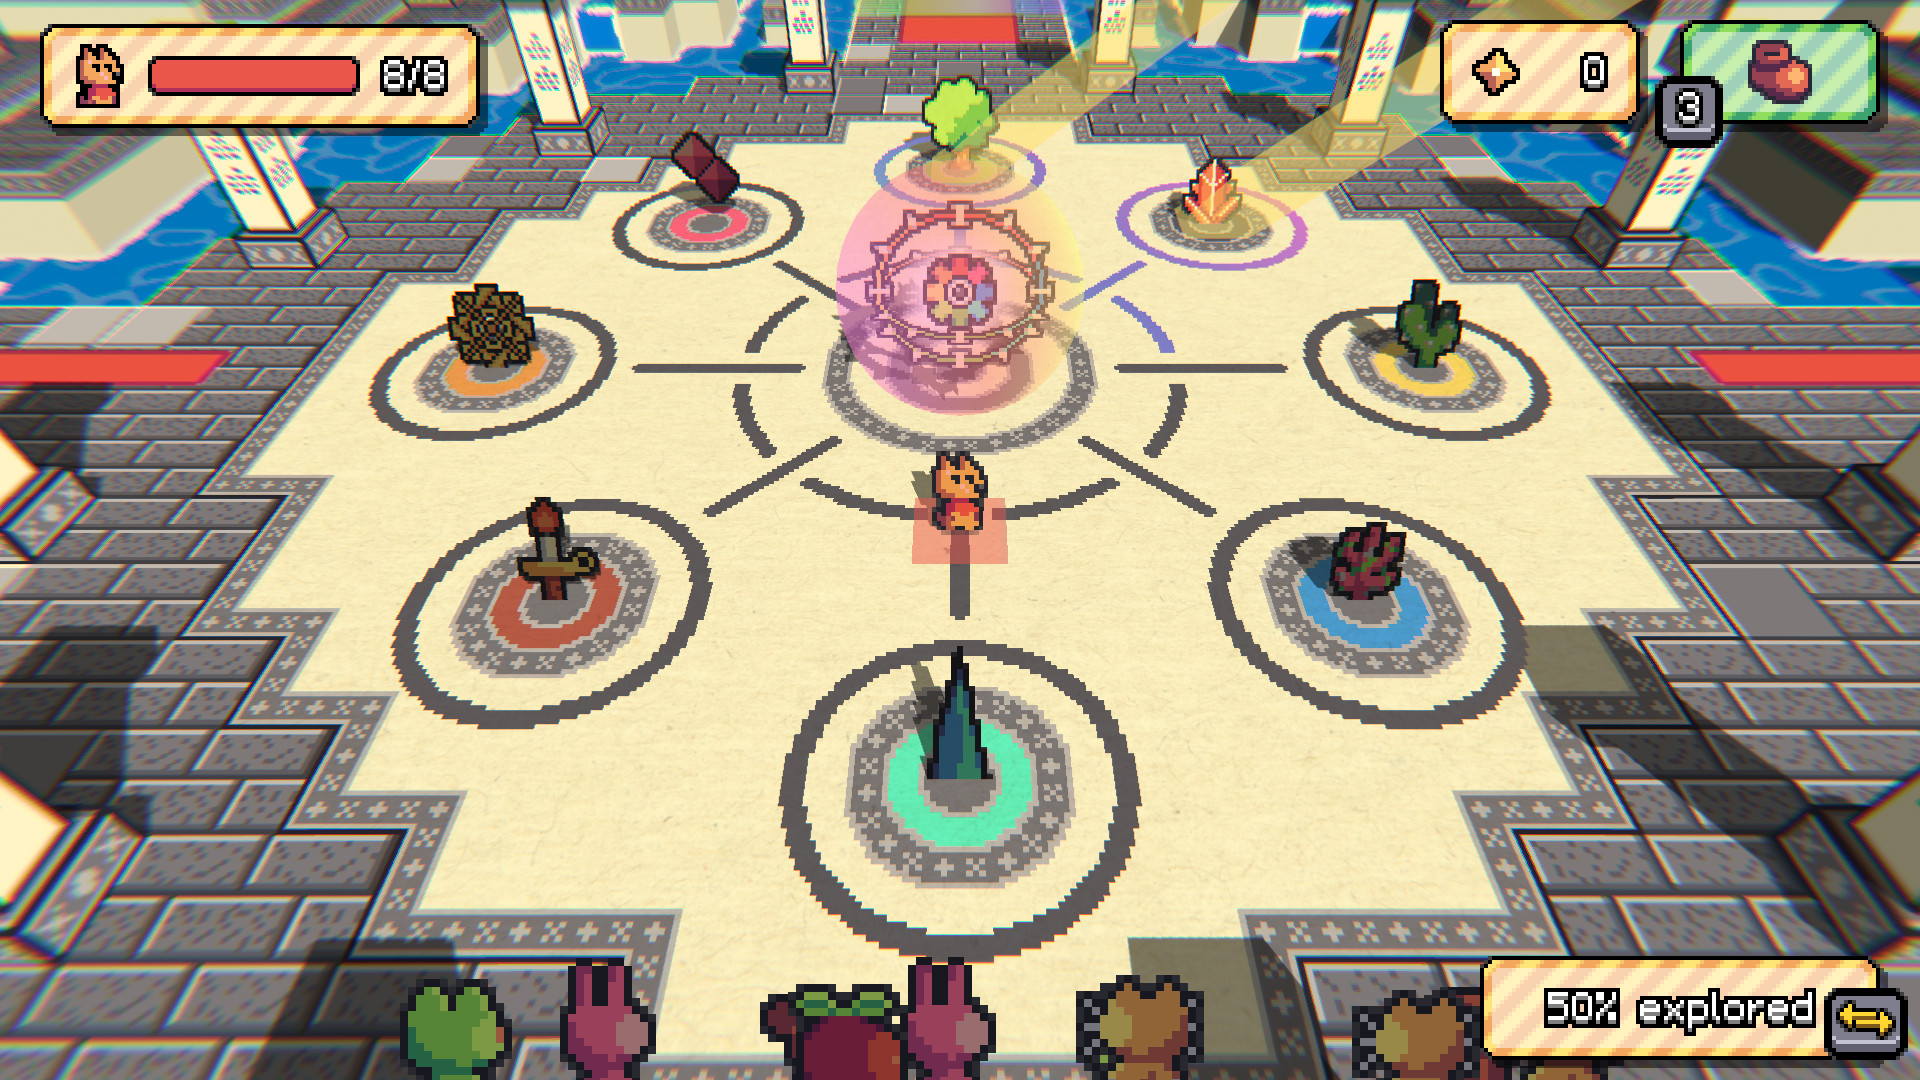 Hub area in between full areas of the roguelike, Paper Mario-style dais with spots for the game's primary collectibles arranged in a hexagram around a central point.